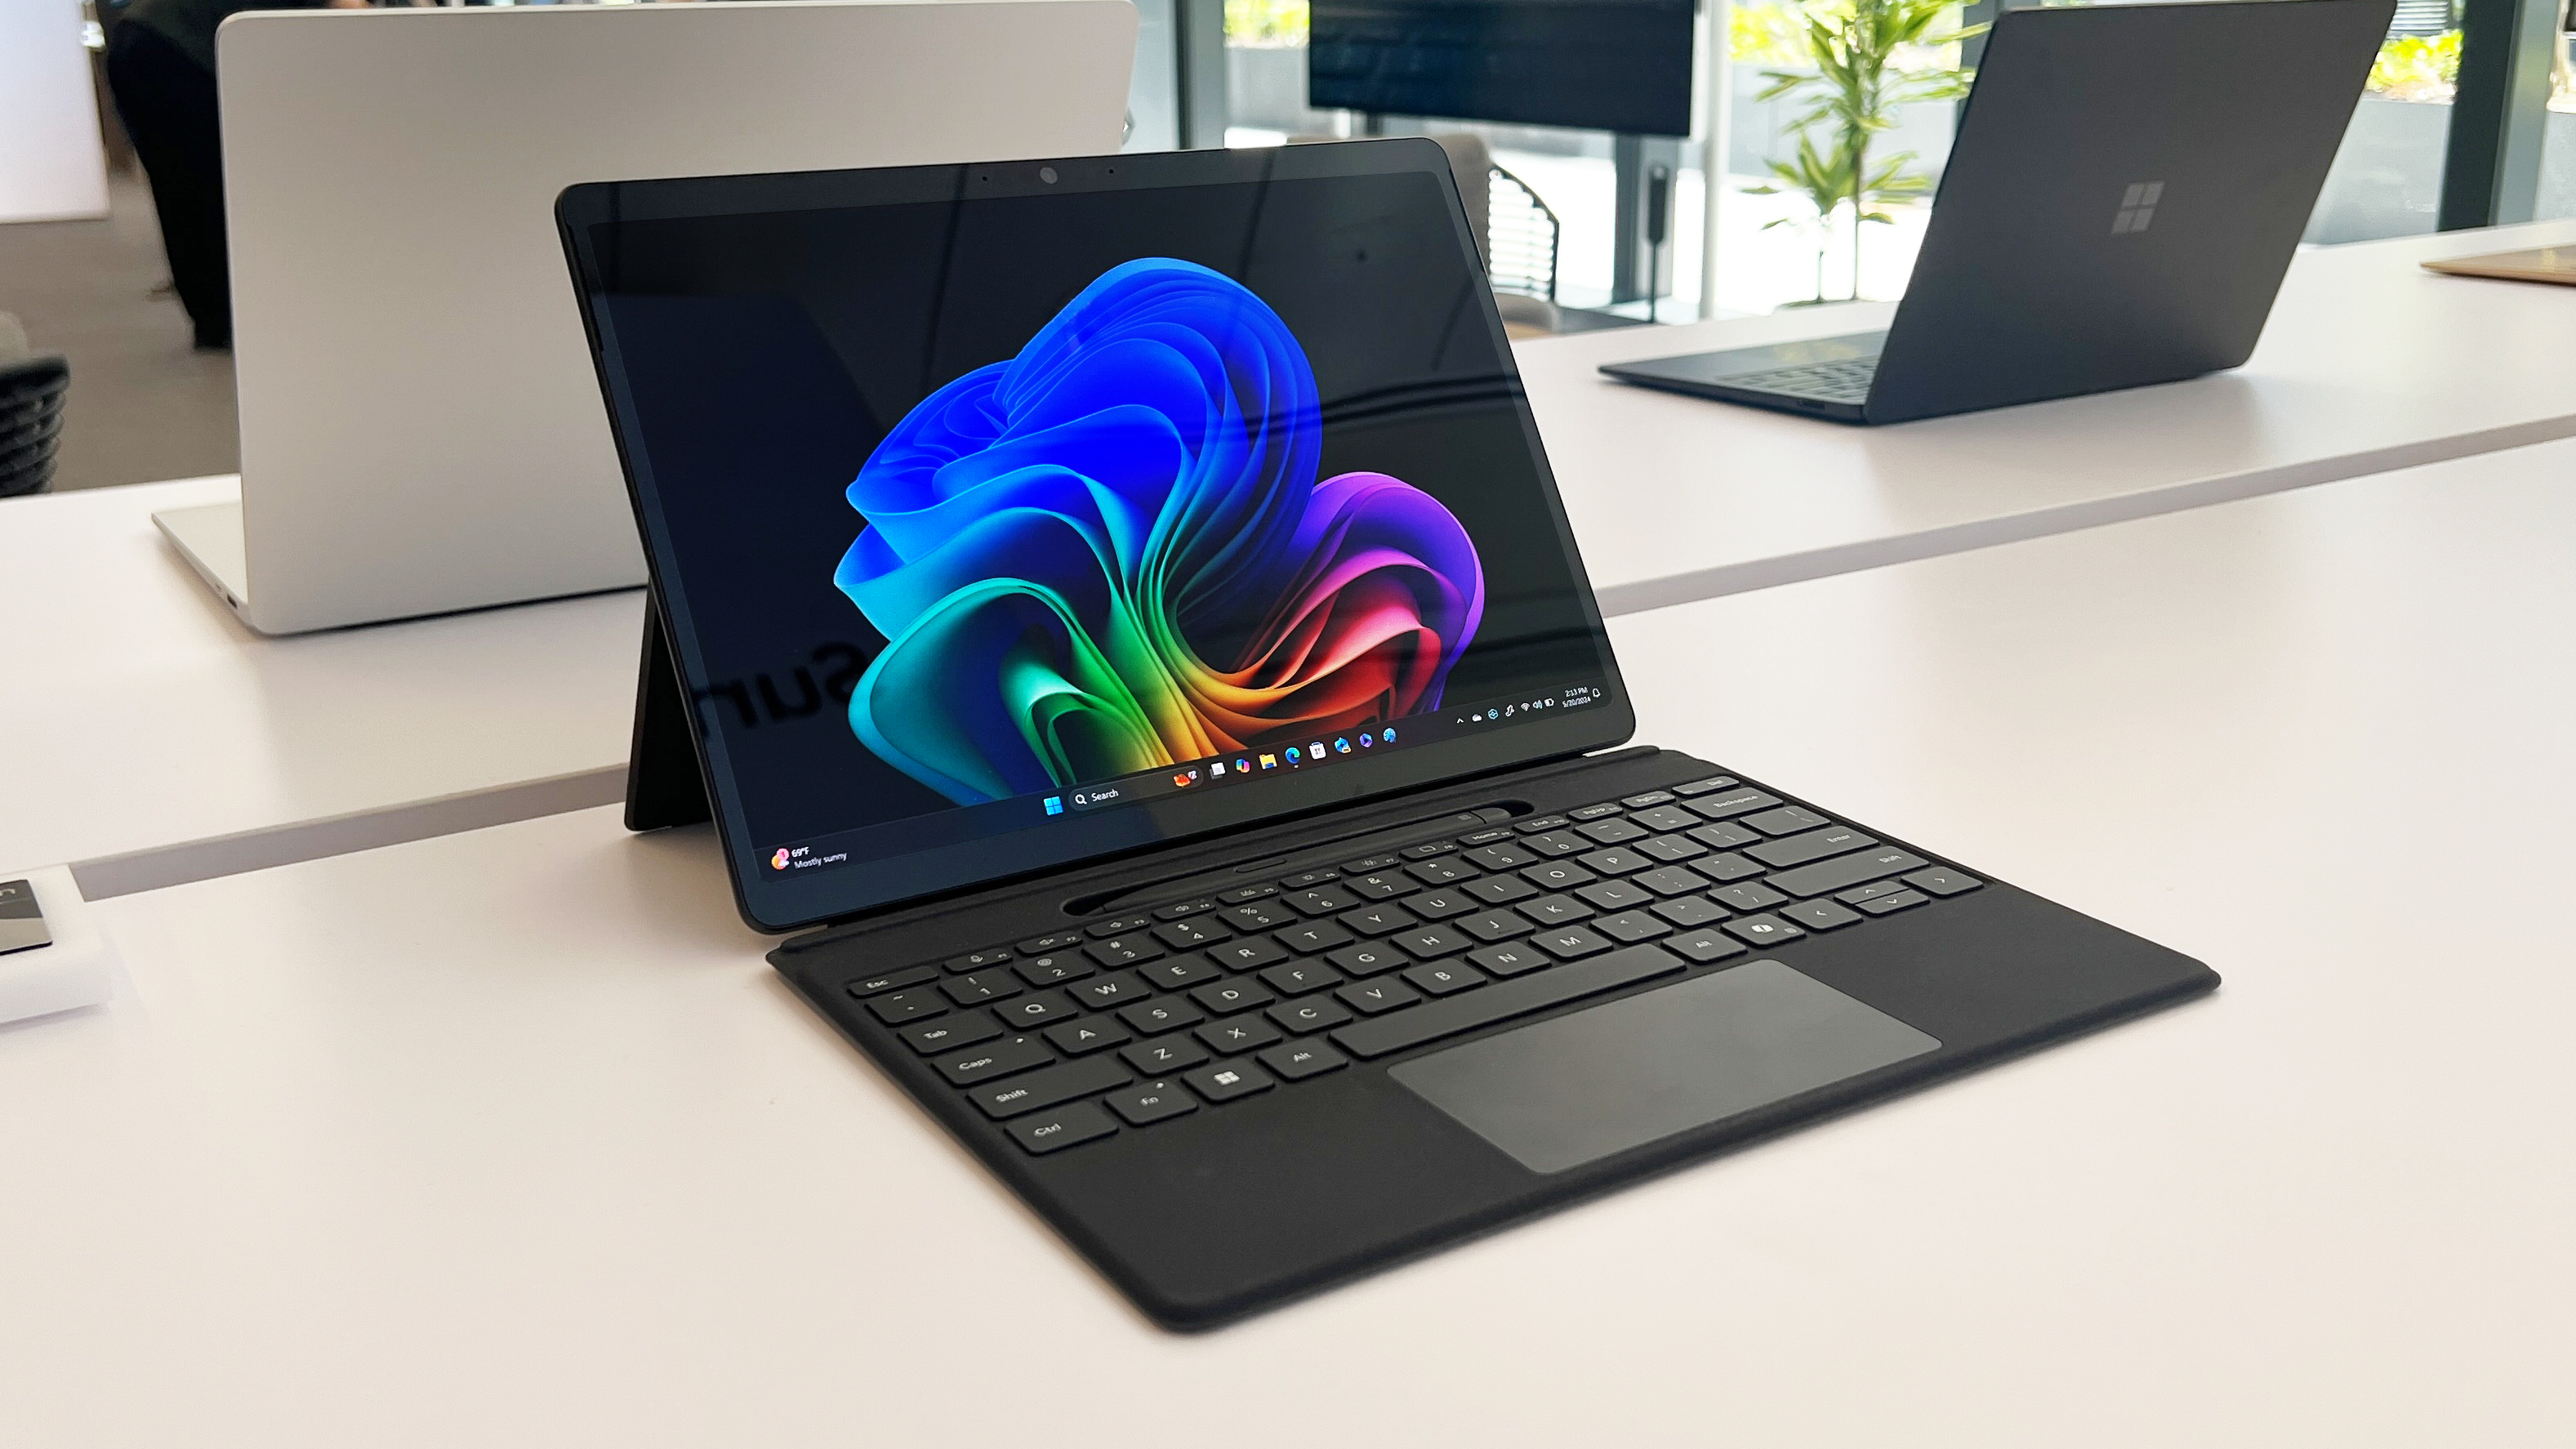 The Microsoft Surface Pro in black